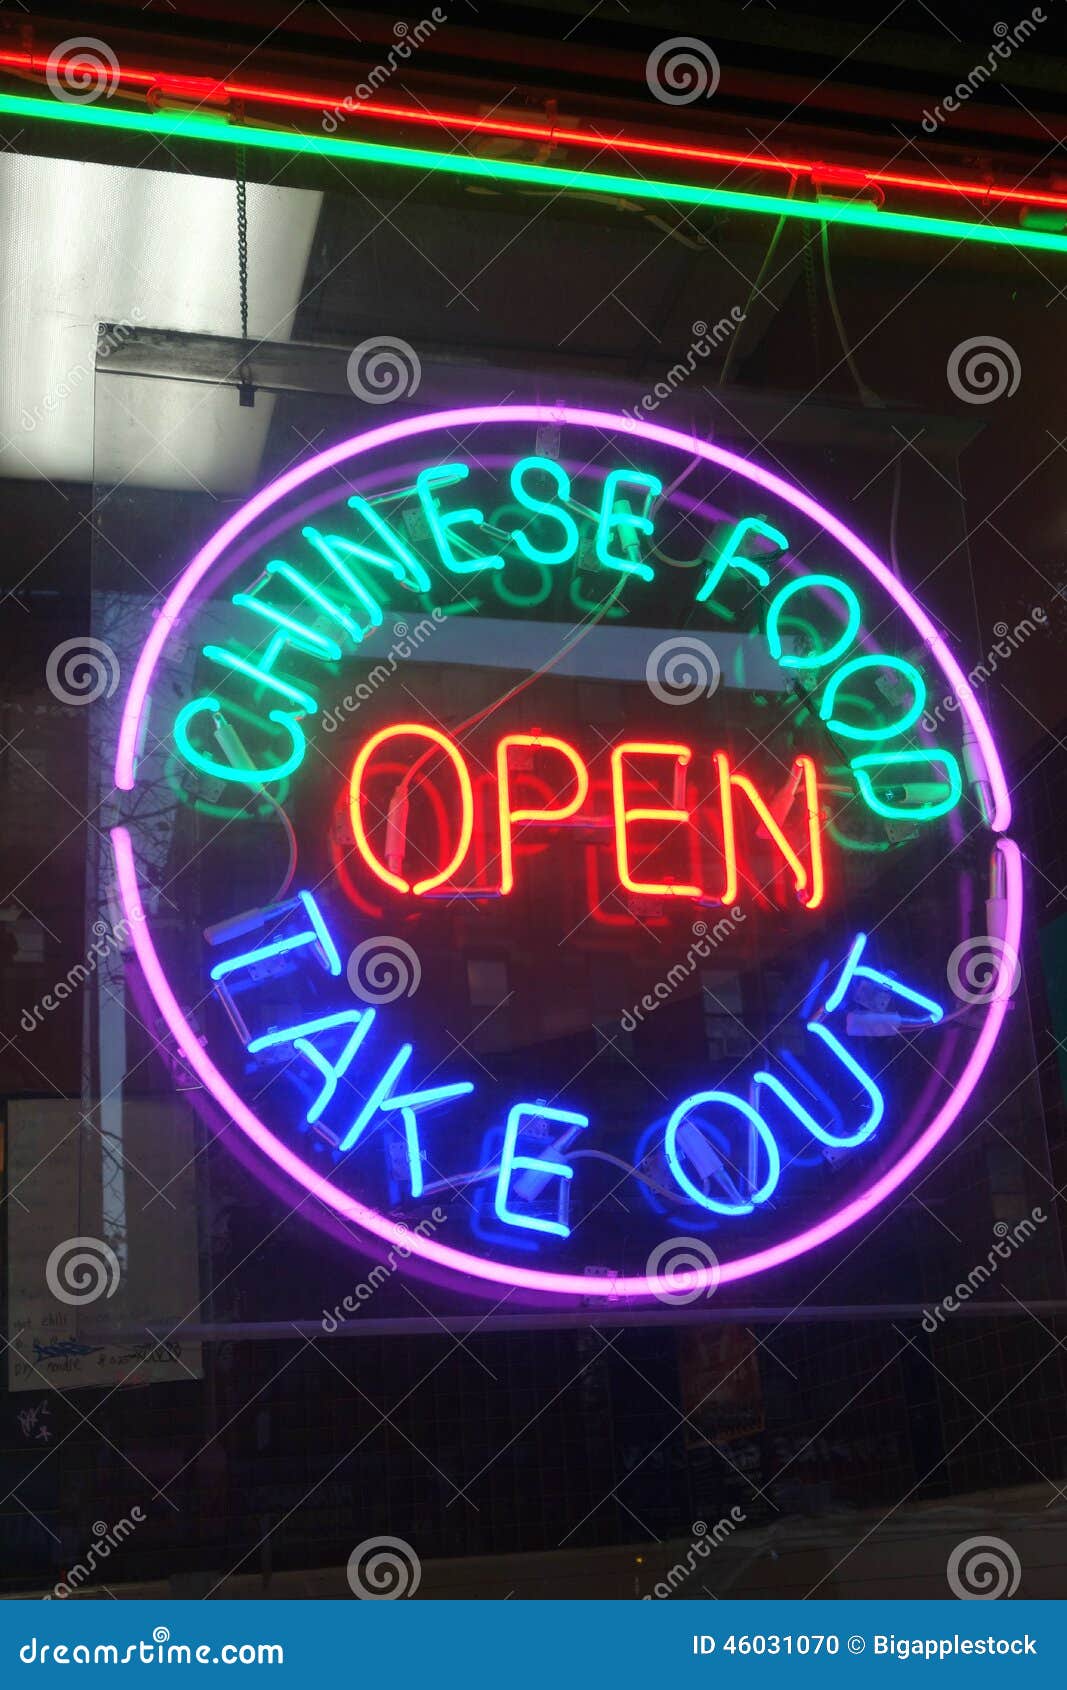 Chinese Food Sign stock photo. Image of ethnic, dining ...